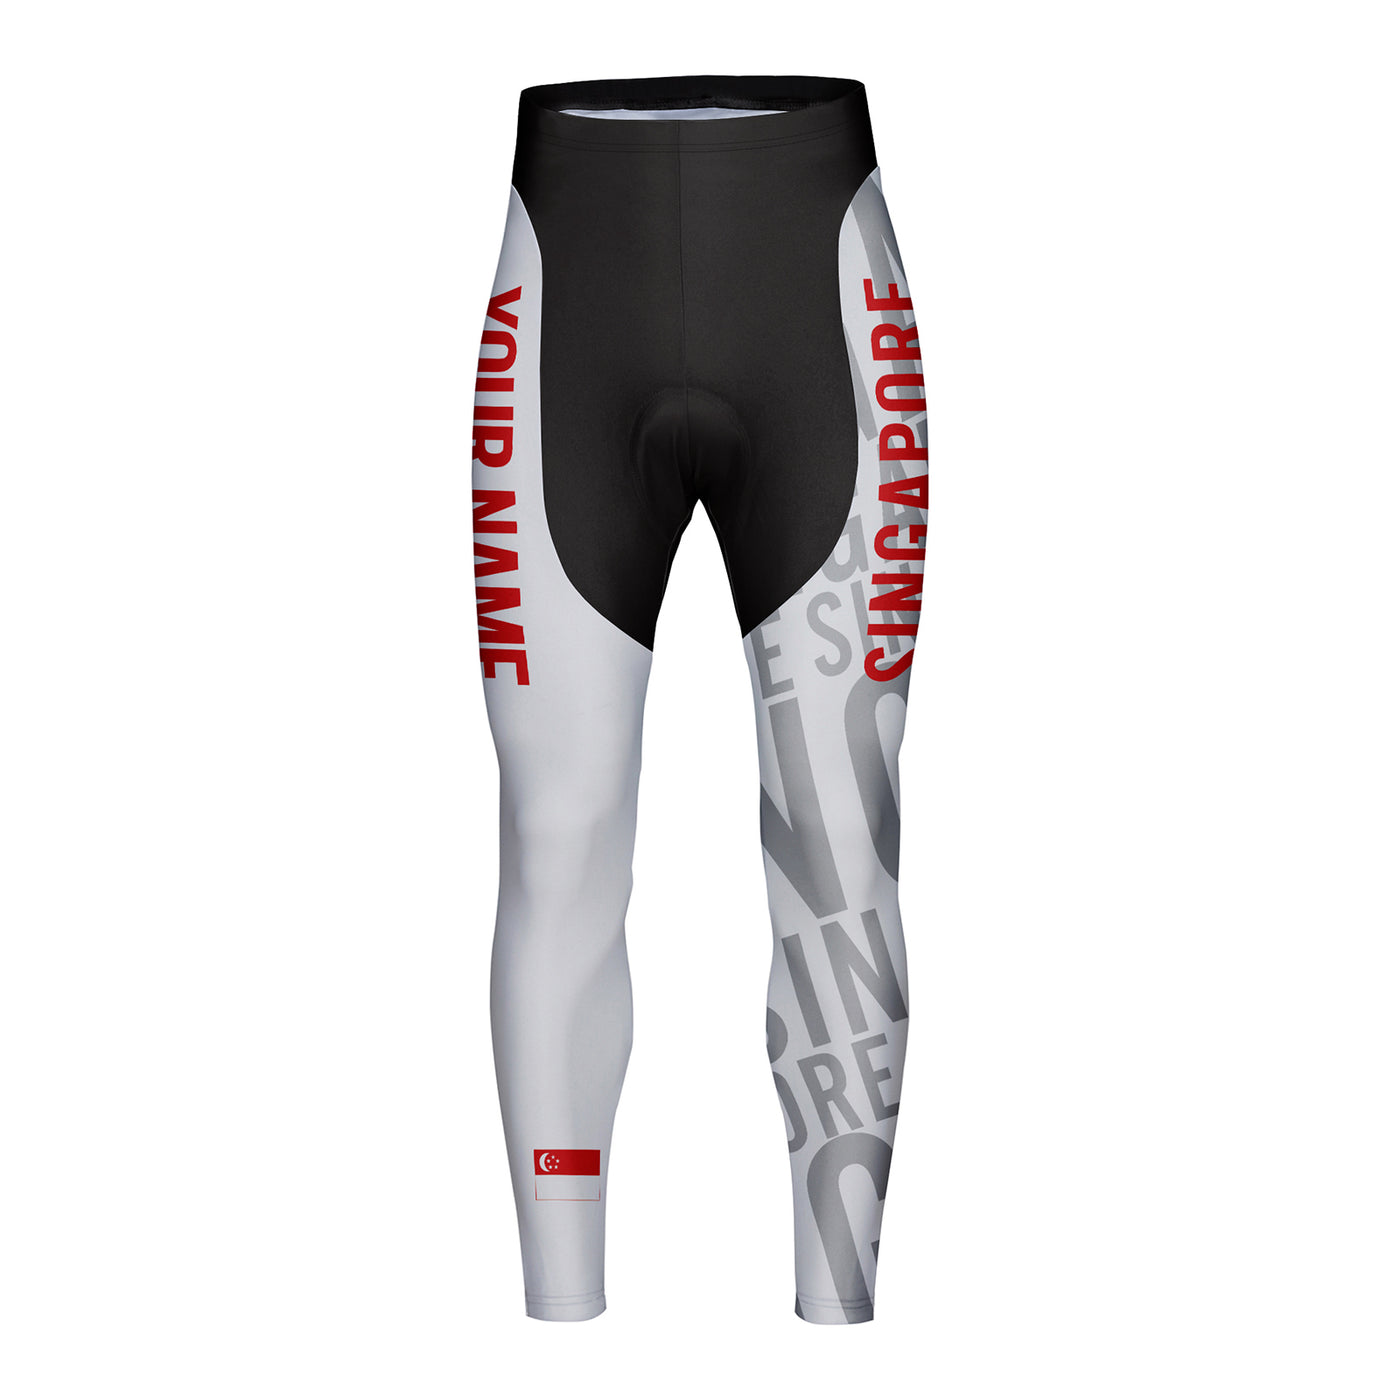 Customized Singapore Unisex Cycling Tights Long Pants